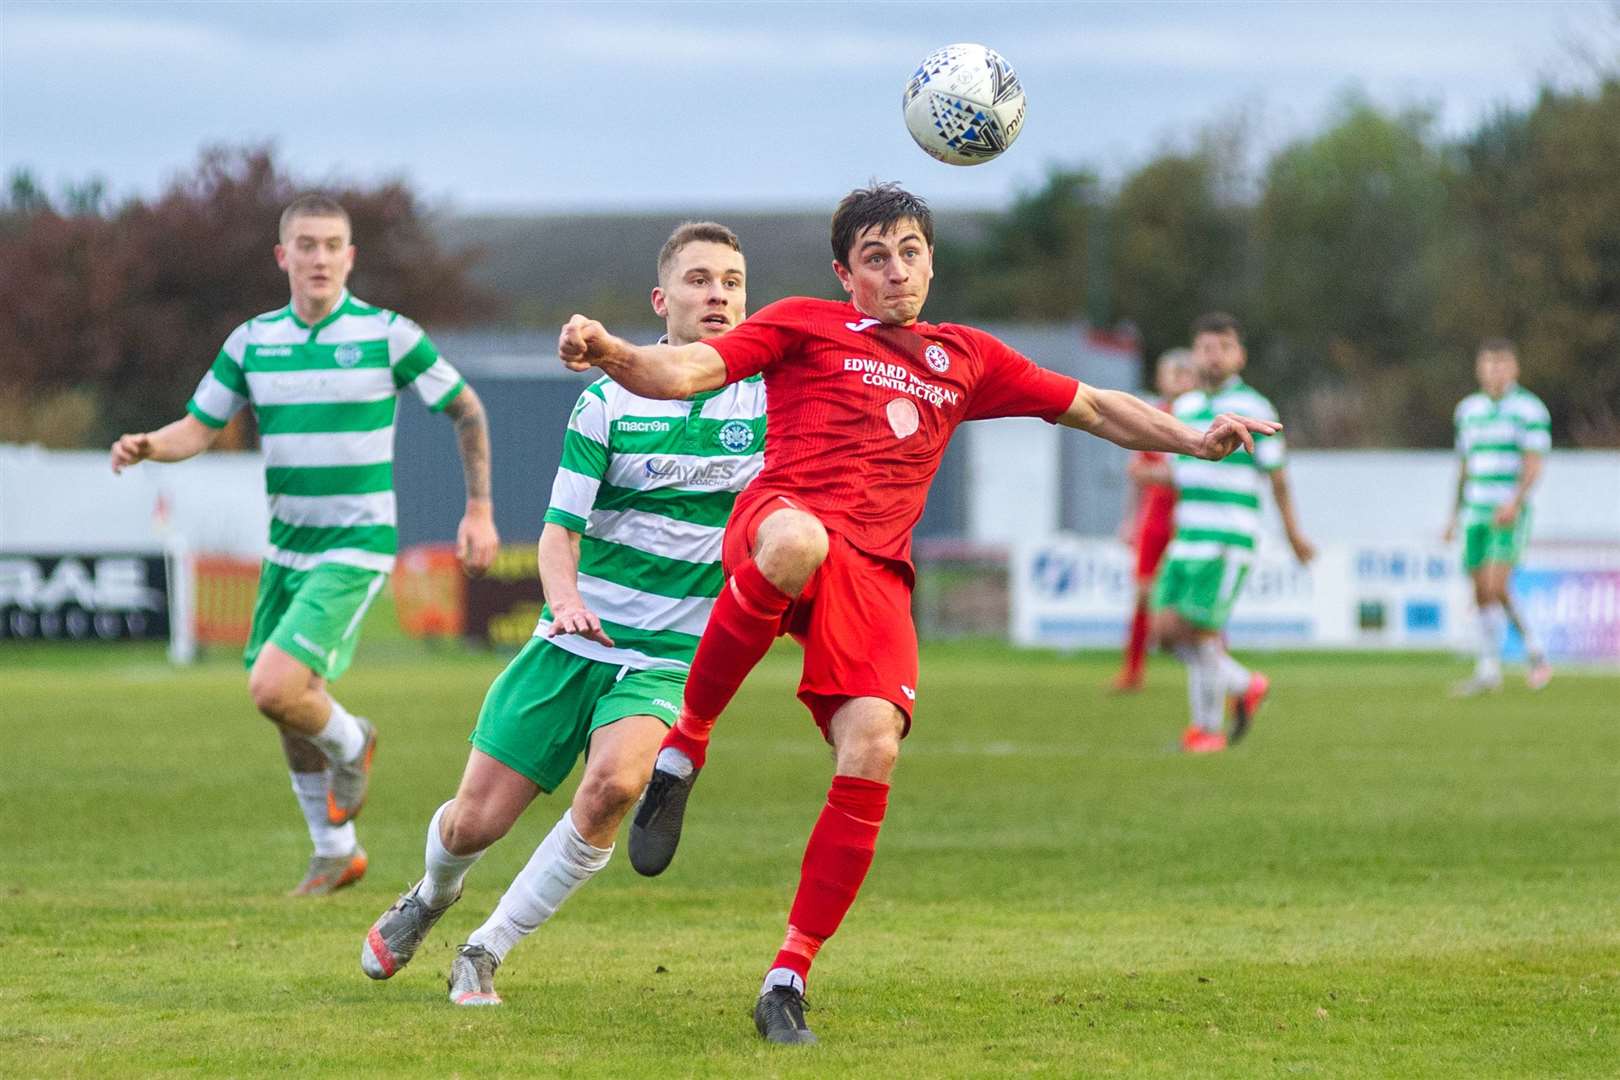 Brora Rangers' John Pickles clears the ball away from Buckie Thistle's Scott Adams. ..Brora Rangers FC (2) vs Buckie Thistle FC (2) - Buckie win 4-3 on penalties - Highland League Cup Semi Final - Dudgeon Park, Brora 18/10/2020...Picture: Daniel Forsyth..